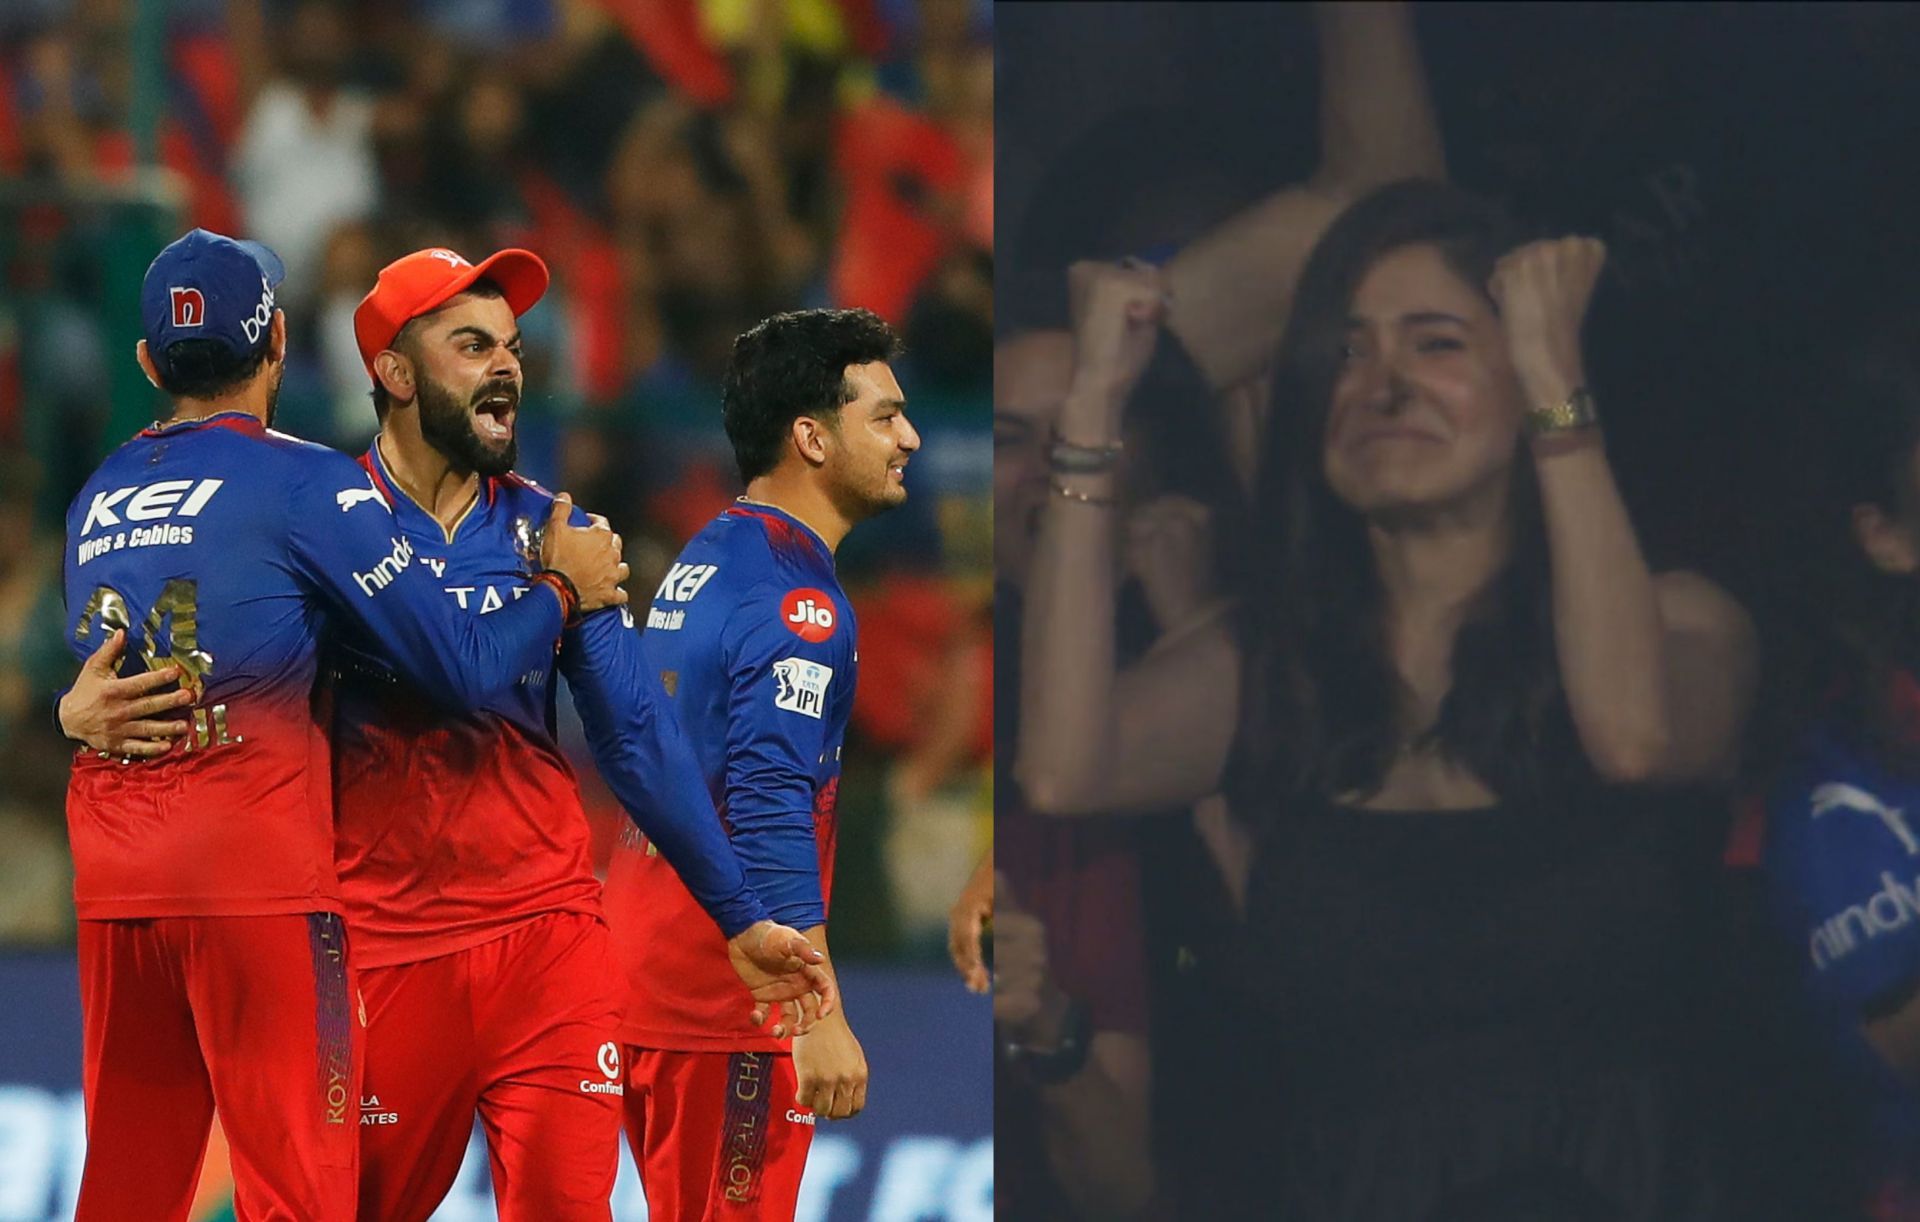 Anushka Sharma was elated in the stands after RCB